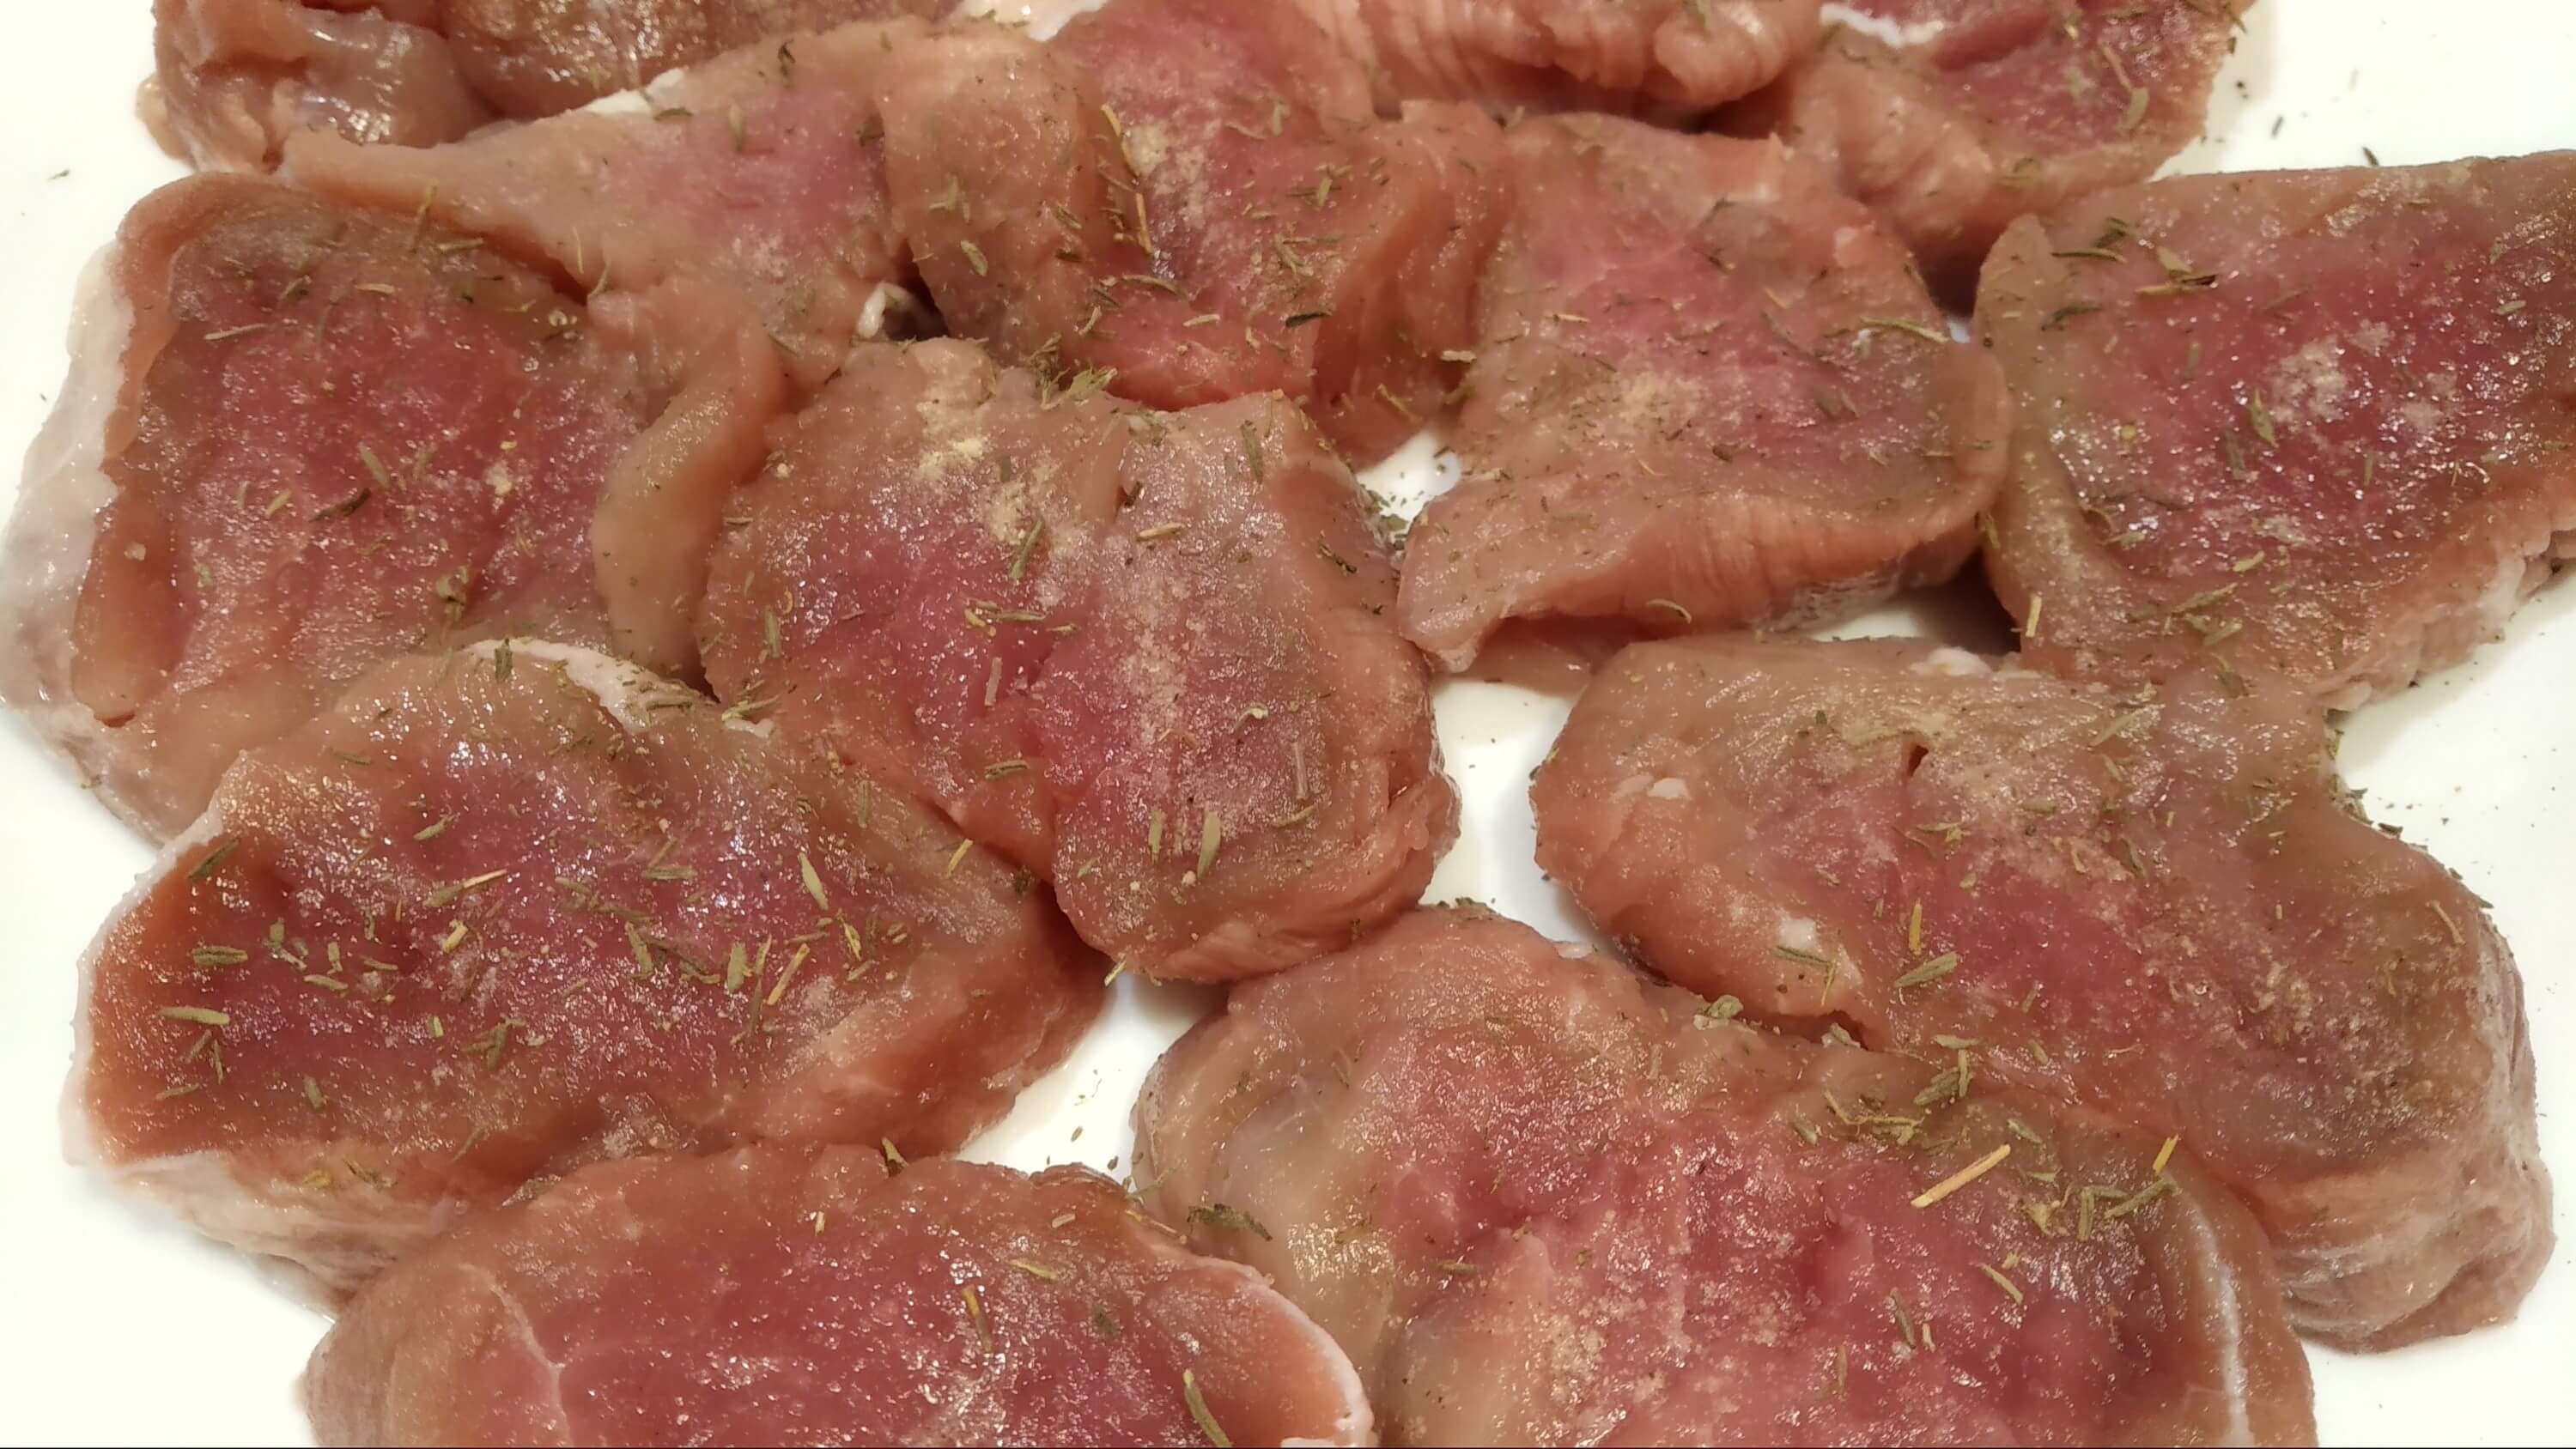 raw pork tenderloin with spices and herbs - instant pot club